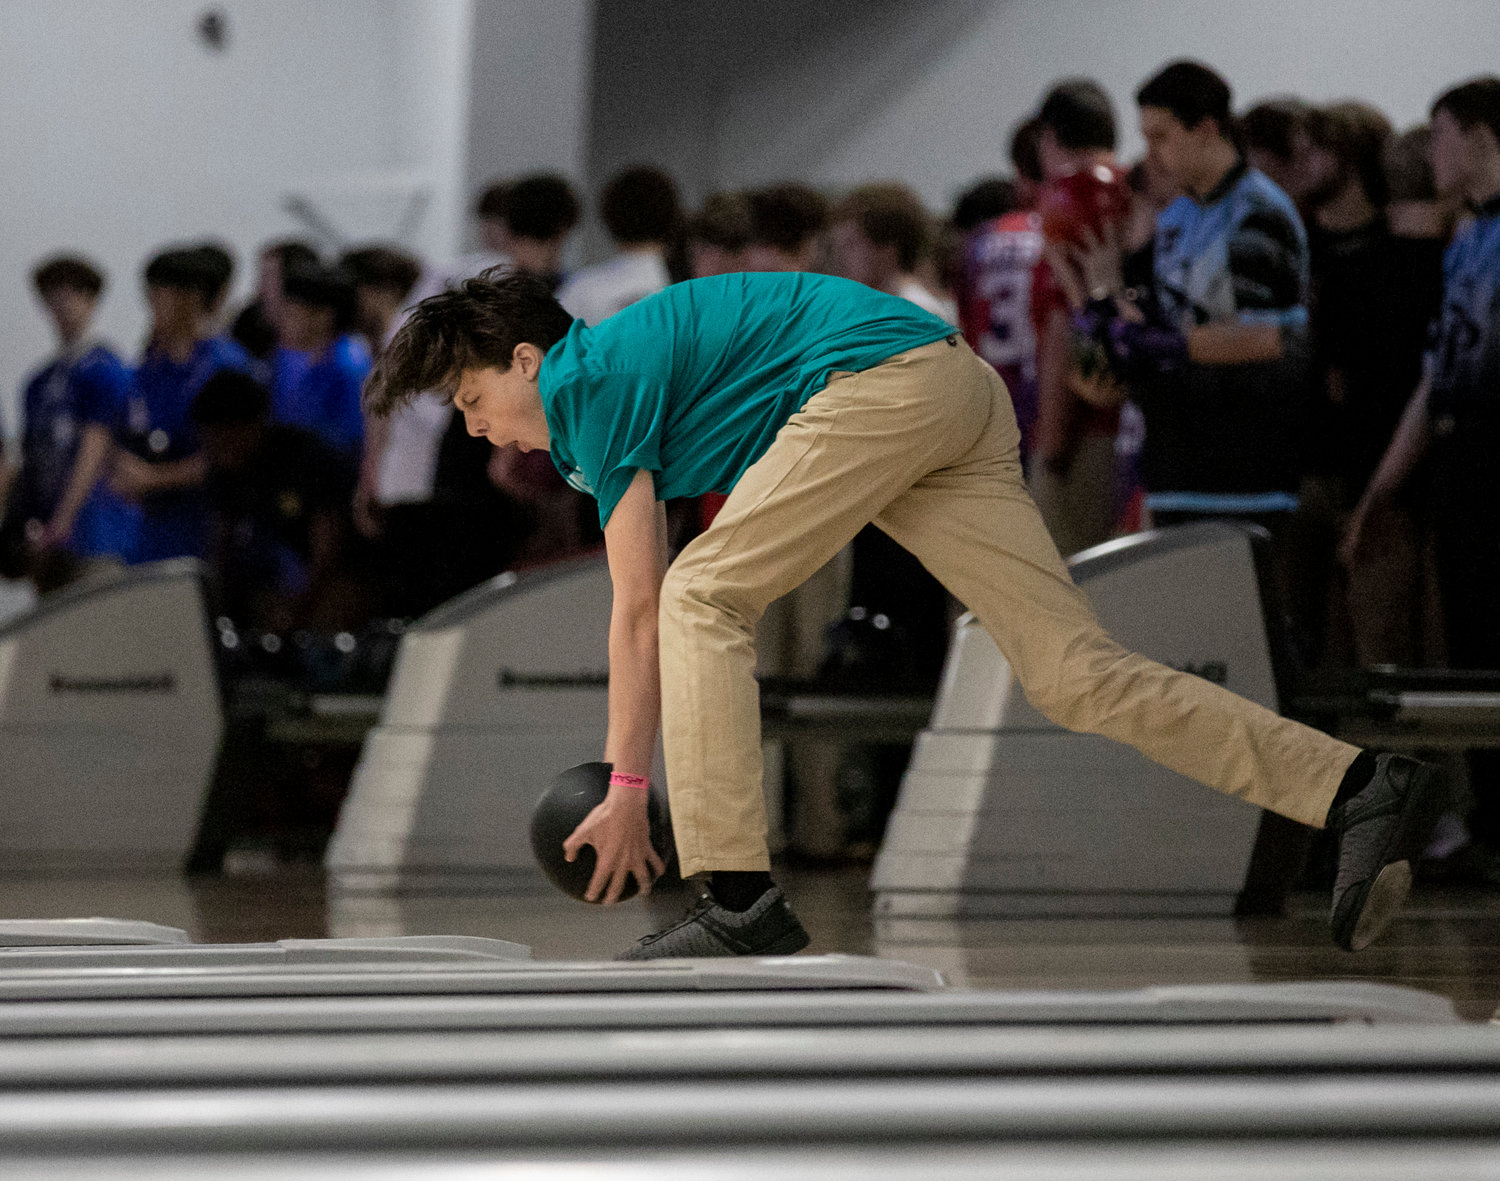 Gulf Shores senior Marshall Egbert fires a shot in warmups before the qualifying round of the South Regional bowling tournament Thursday, Jan. 19, at Eastern Shore Lanes in Spanish Fort. One of three Dolphins recognized, Egbert was named an all-state honorable mention by Alabama high school bowling coaches in the first-ever all-state team assembled.